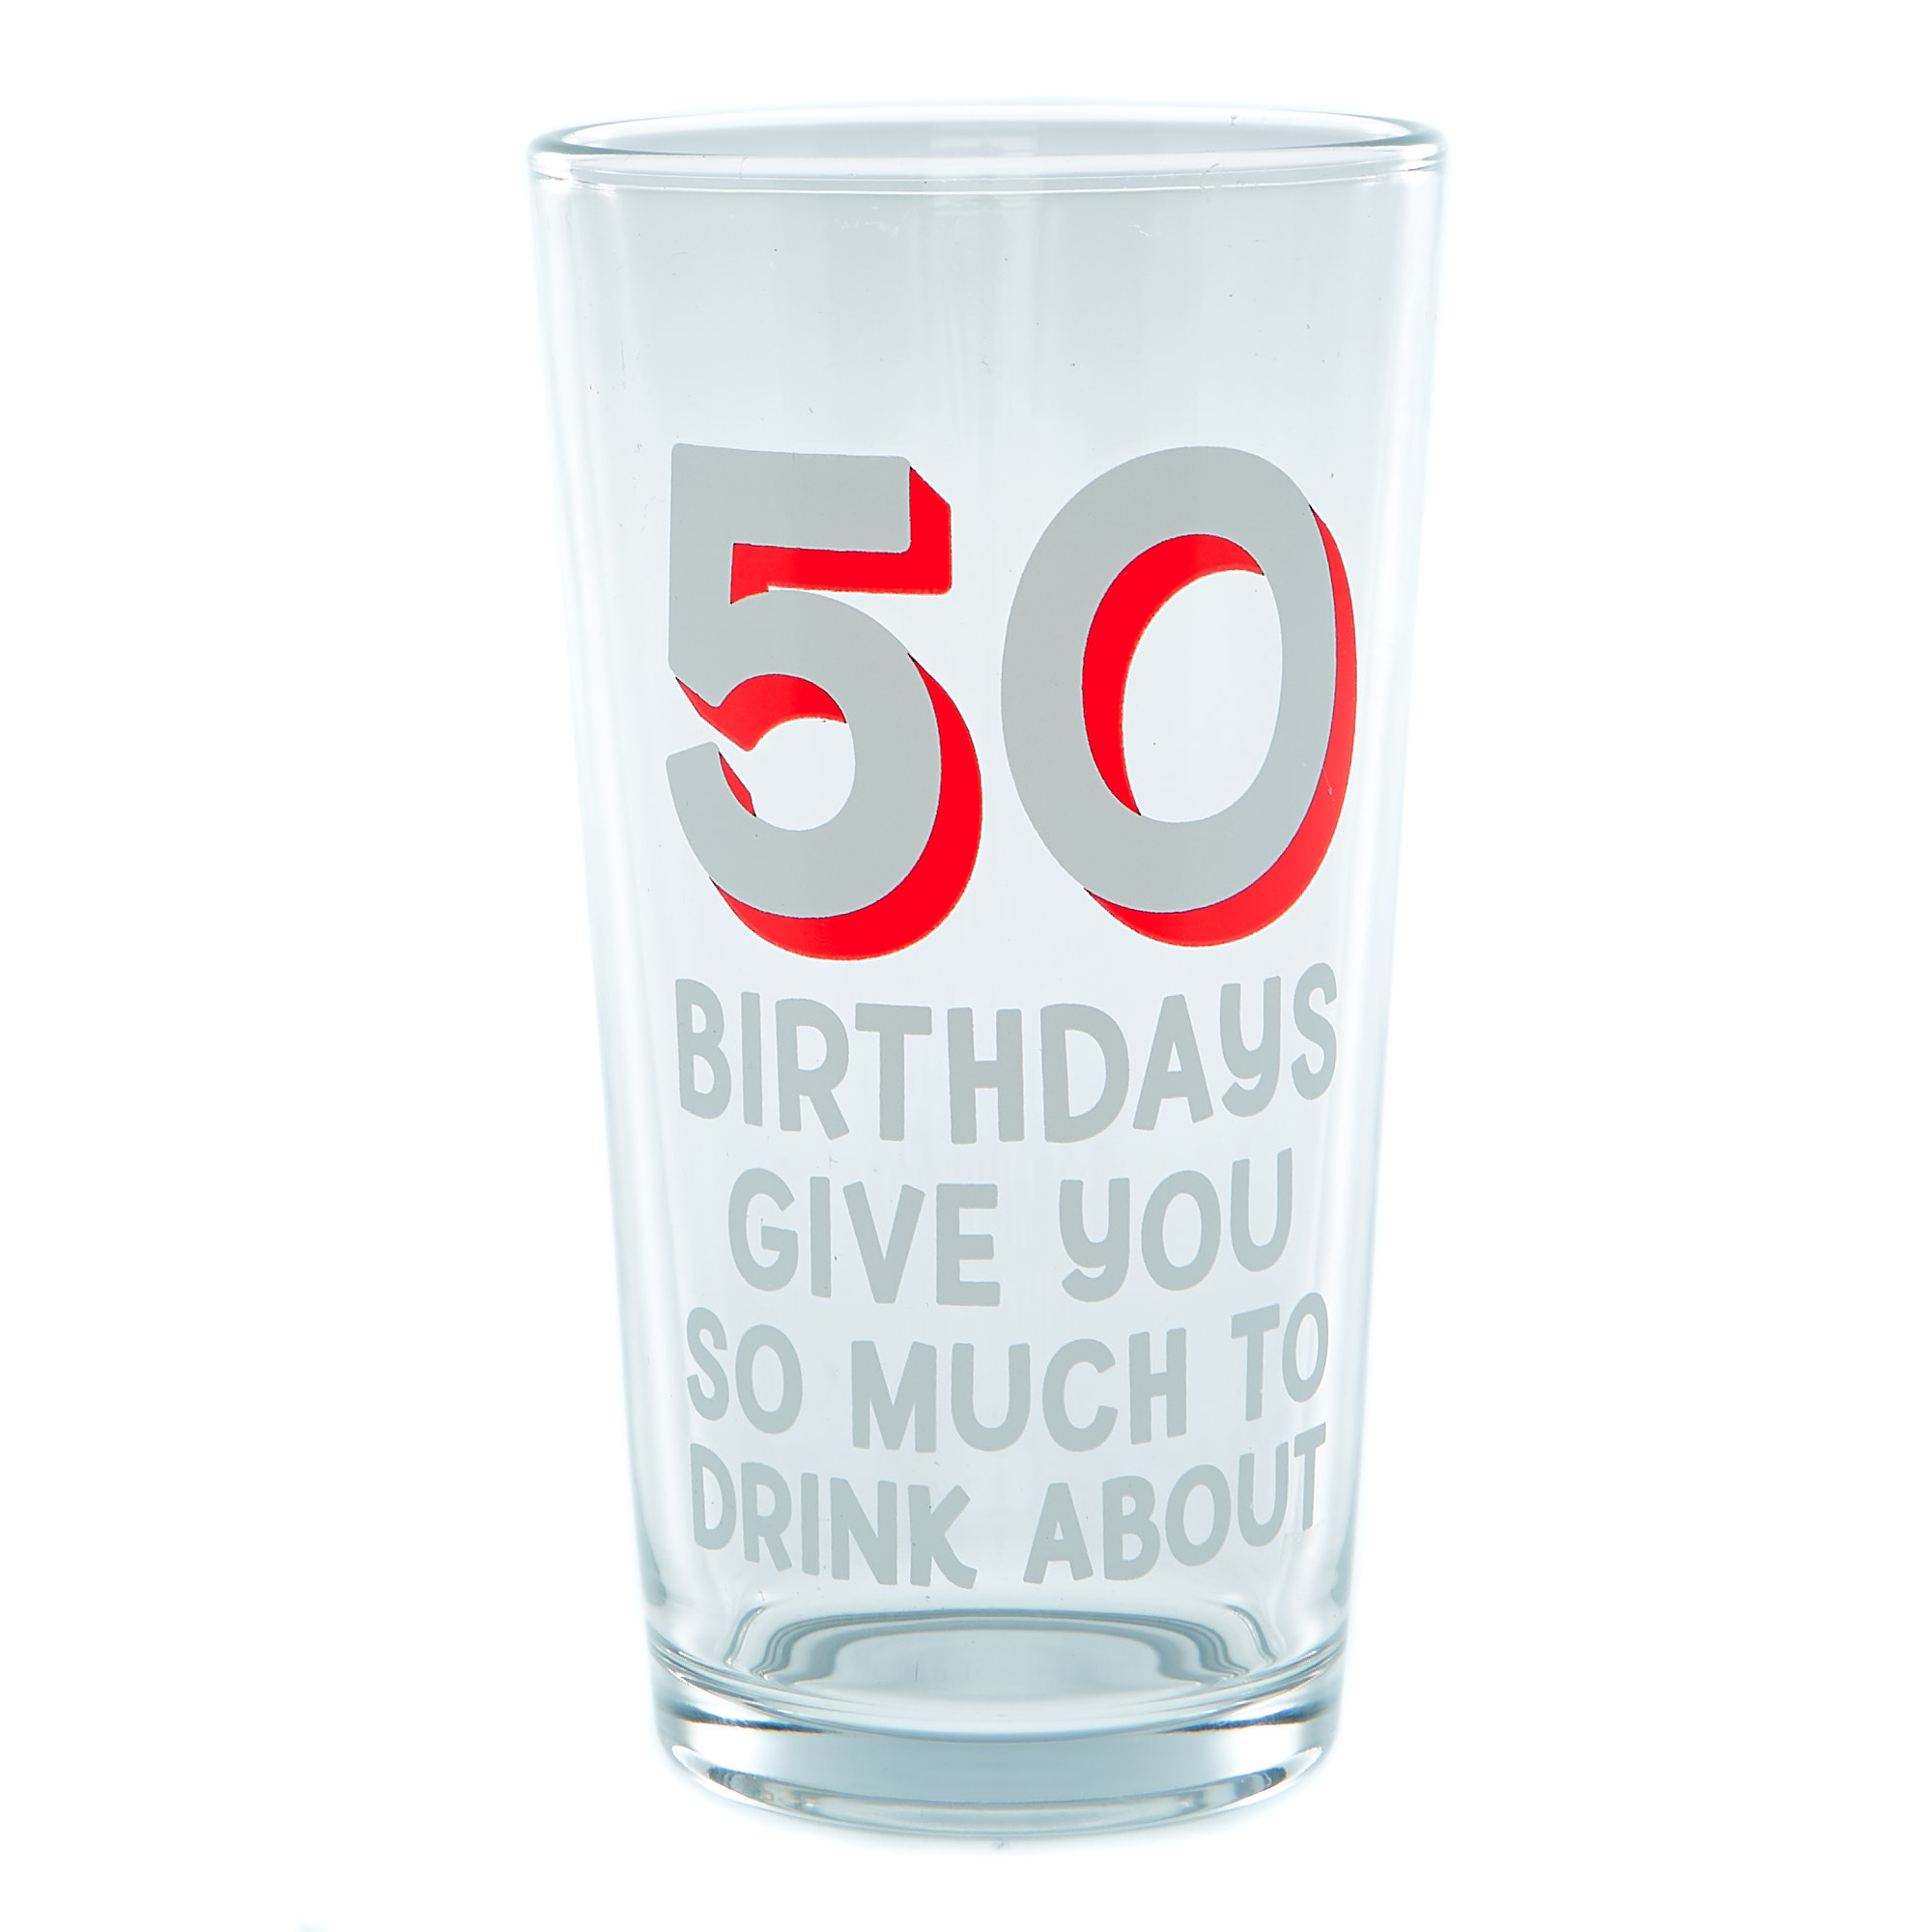 50th Birthday Pint Glass - So Much To Drink About 